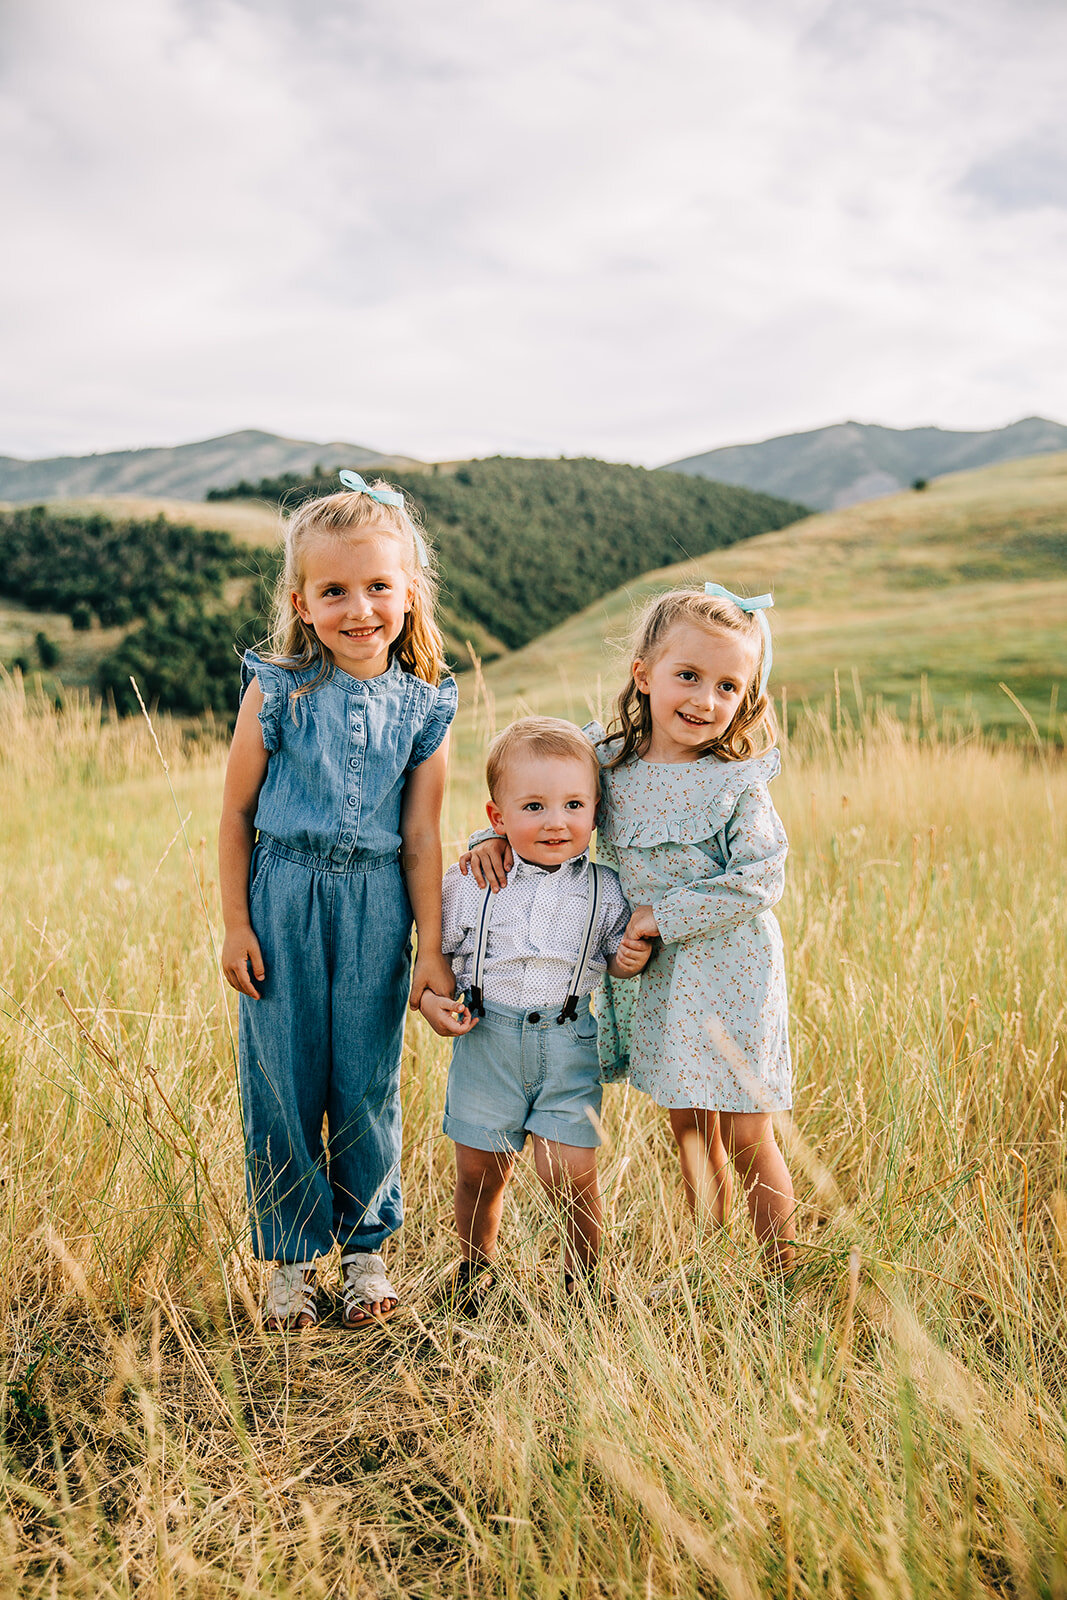  family pictures in hyrum utah toddlers young children siblings posing together cousins blue denim romper mint dress baby boy suspenders yellow fields rolling green hills summer family photos grandchildren bella alder photography utah family photogra